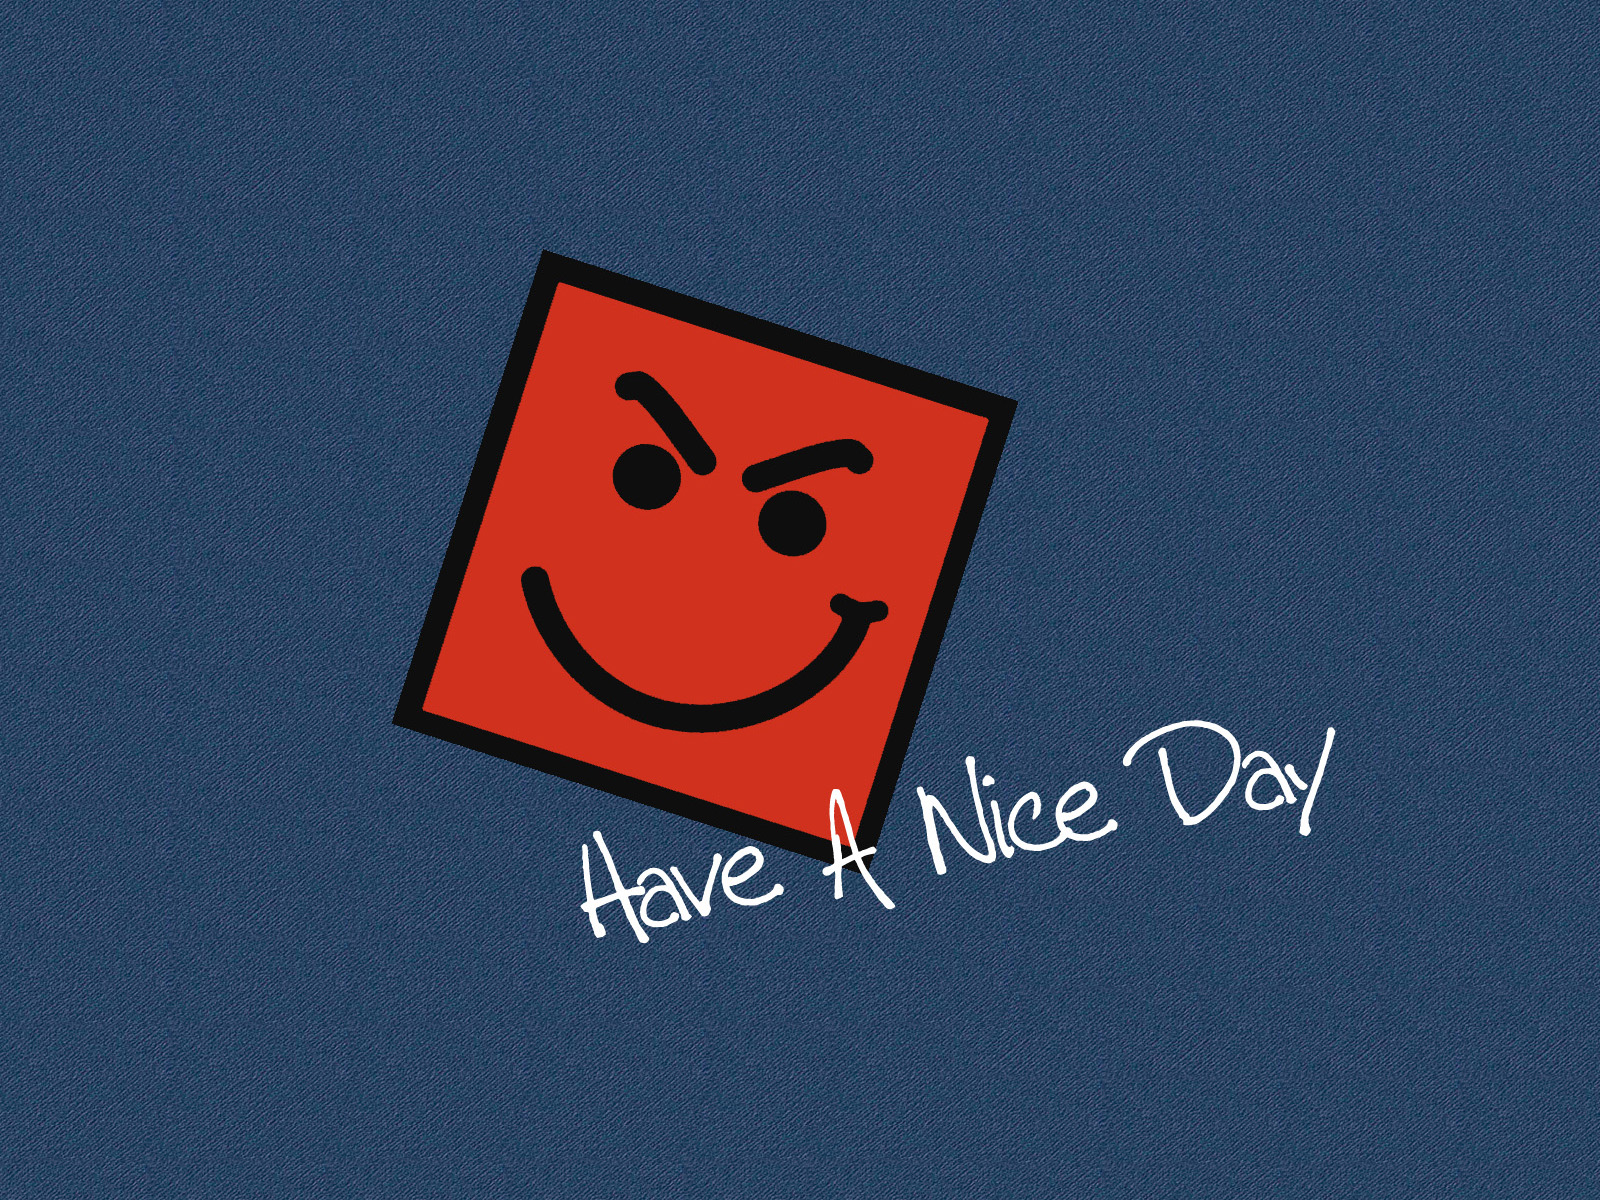 Have A Nice Day Wallpaper